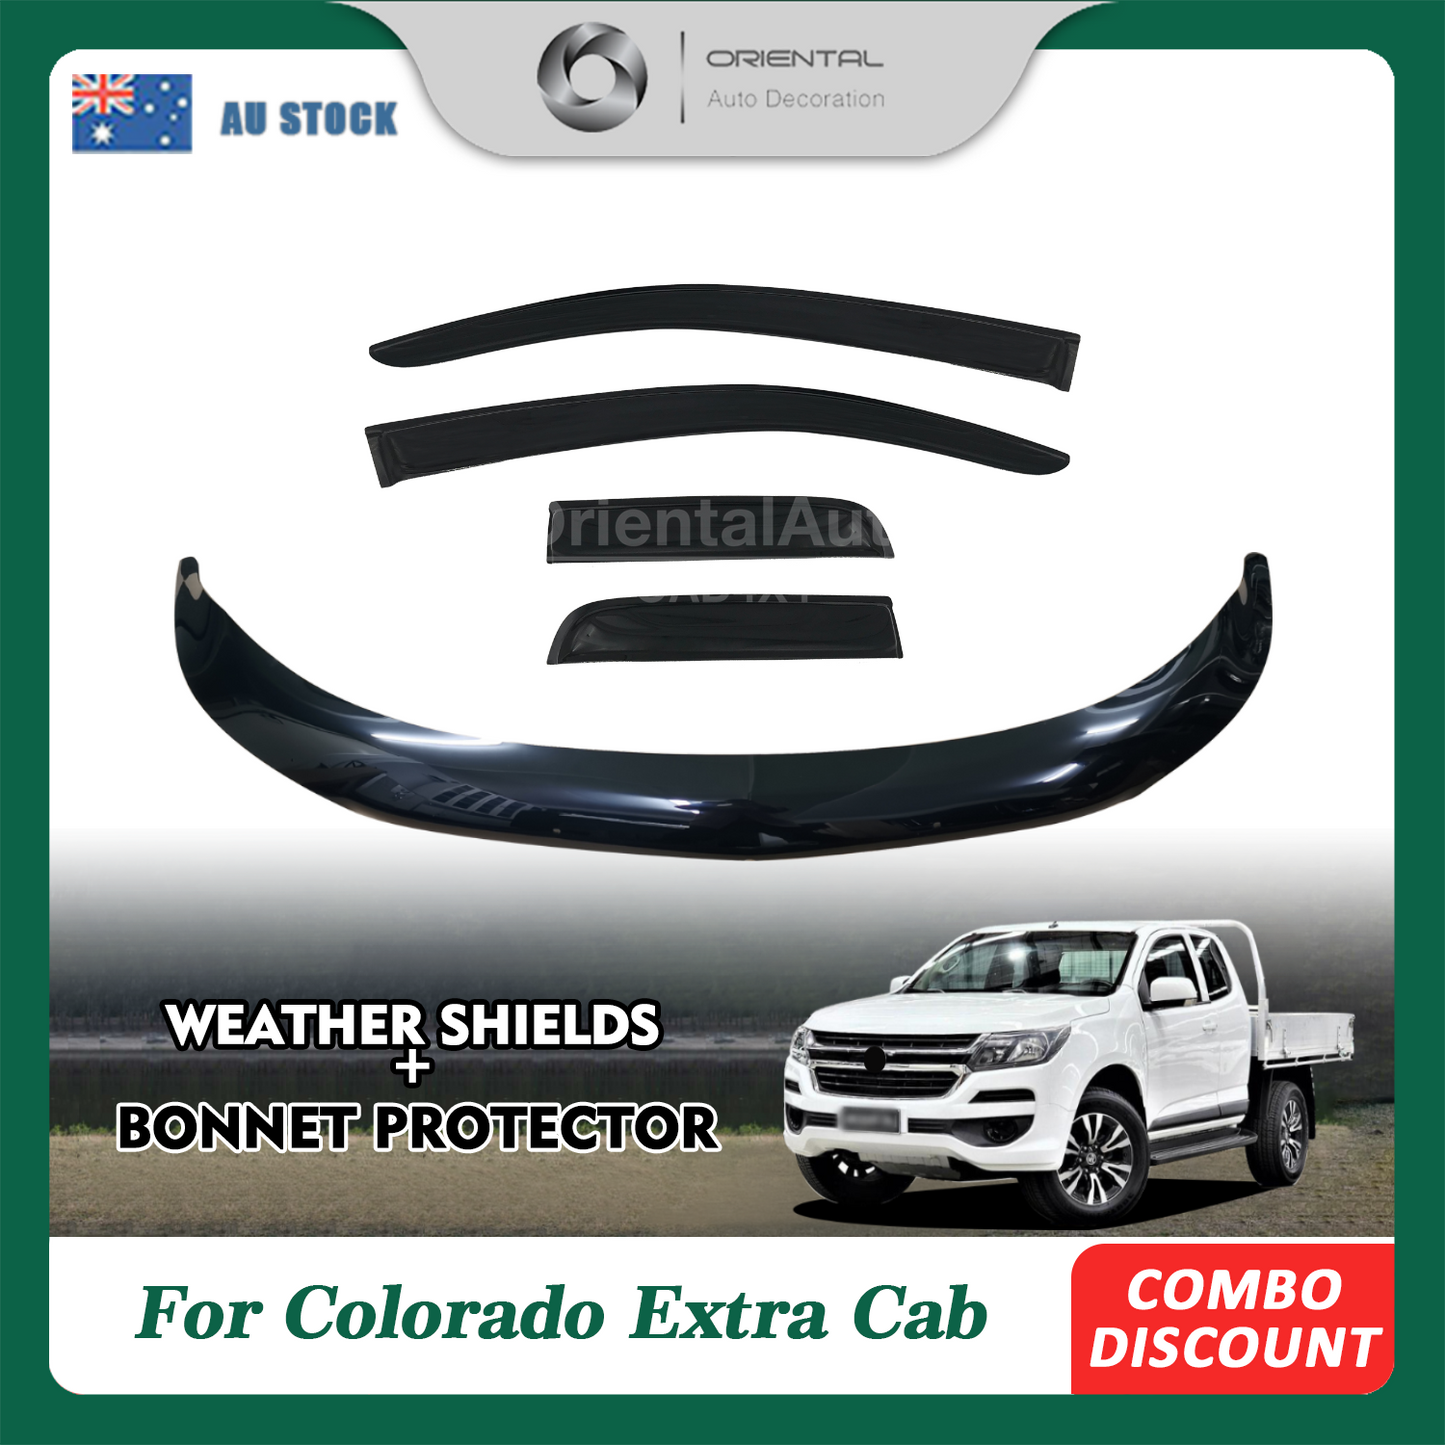 Bonnet Protector & Luxury Weathershields Weather Shields Window Visors For Holden Colorado RG Series Extra Cab 2016-Onwards